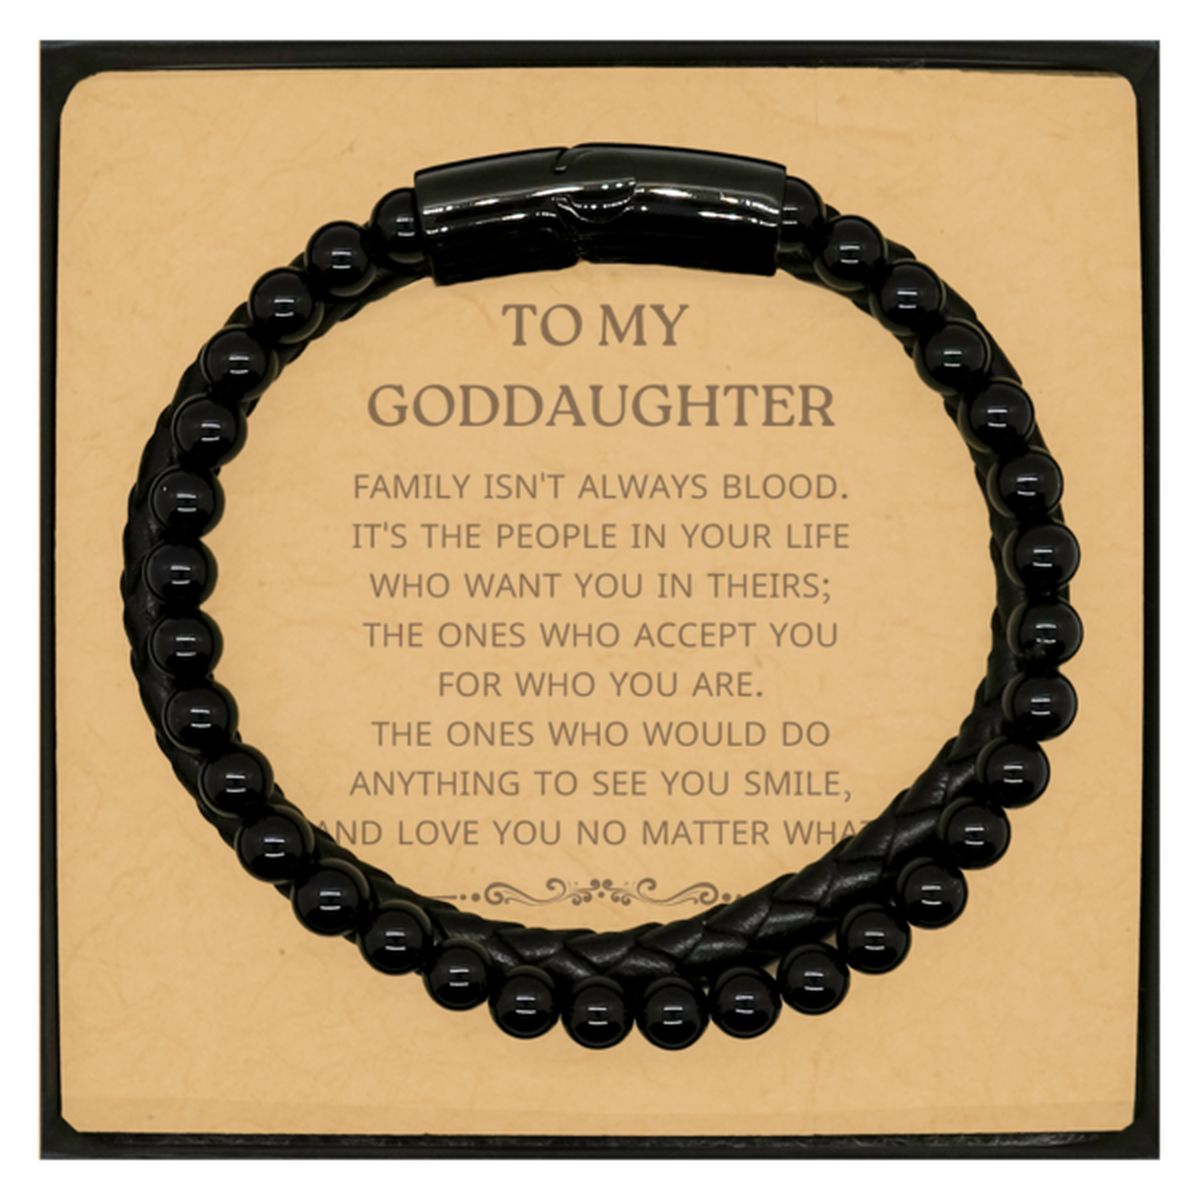 To My Goddaughter Gifts, Family isn't always blood, Goddaughter Stone Leather Bracelets, Birthday Christmas Unique Present For Goddaughter